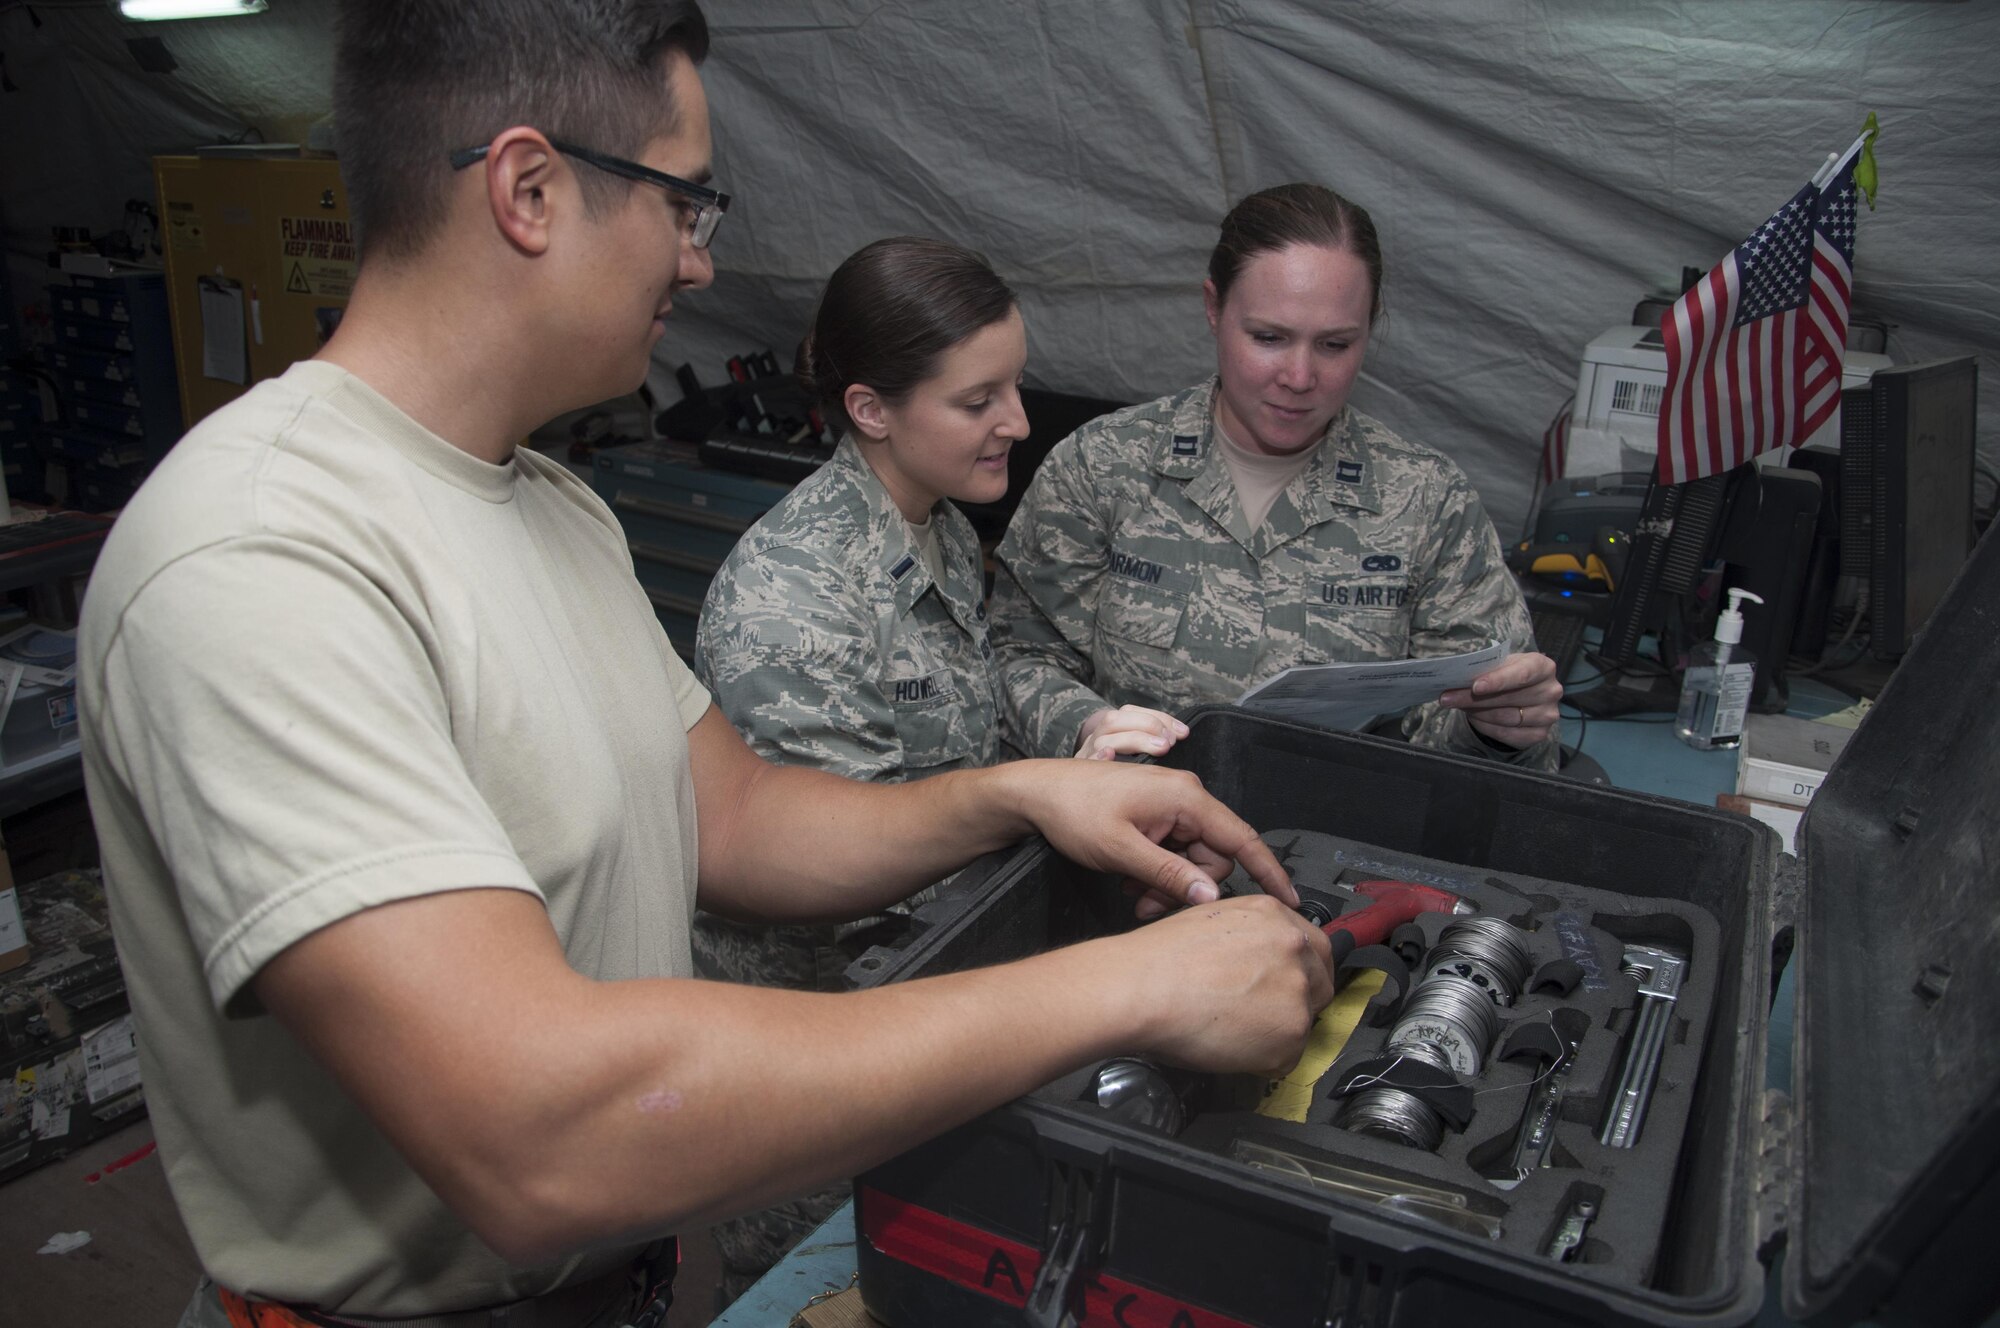 Staff Sgt. Bradley Chaplin, 1st Lt. Erin Howell and Capt. Katherine Harmon from the 5th Expeditionary Air Mobility Squadron inspect a tool kit that is used for maintenance Sept. 29, 2016 at an undisclosed location in Southwest Asia. They support the maintainers by ensuring that equipment and parts are available to get the mission accomplished.(U.S. Air Force photo by Master Sgt. Anika Jones/Released)